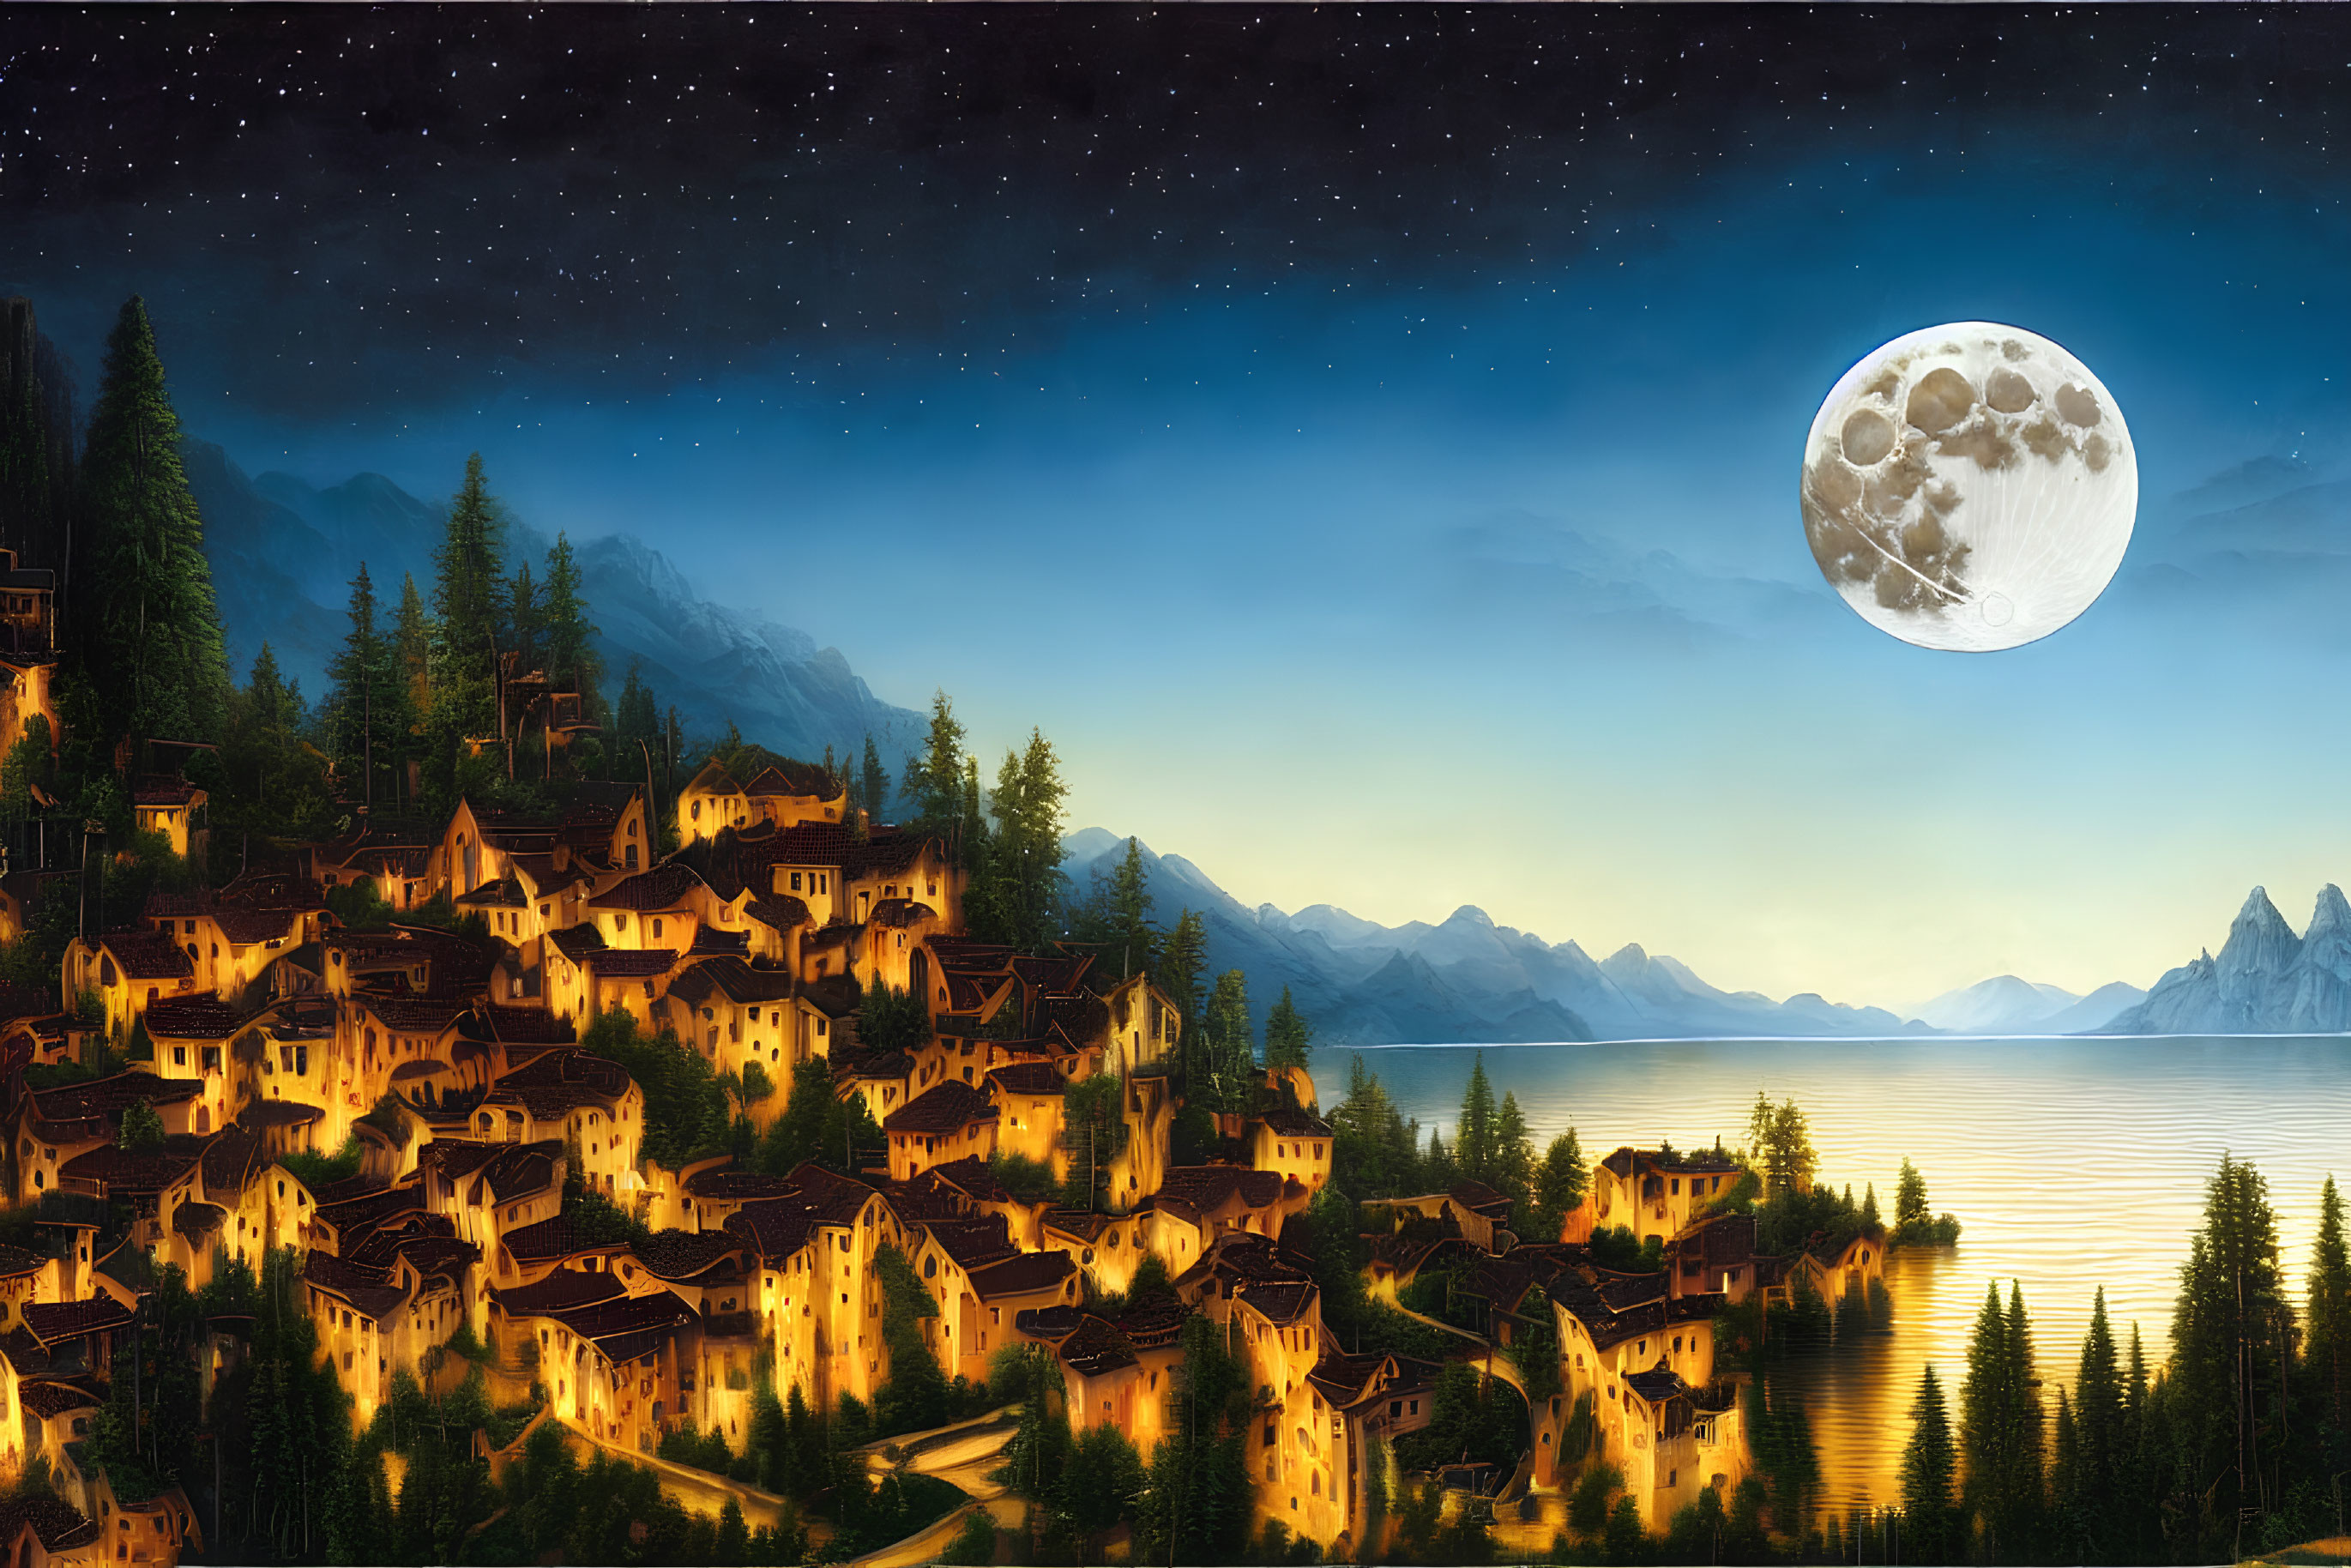 Scenic night view of lakeside town with glowing windows, mountains, starry sky, detailed moon